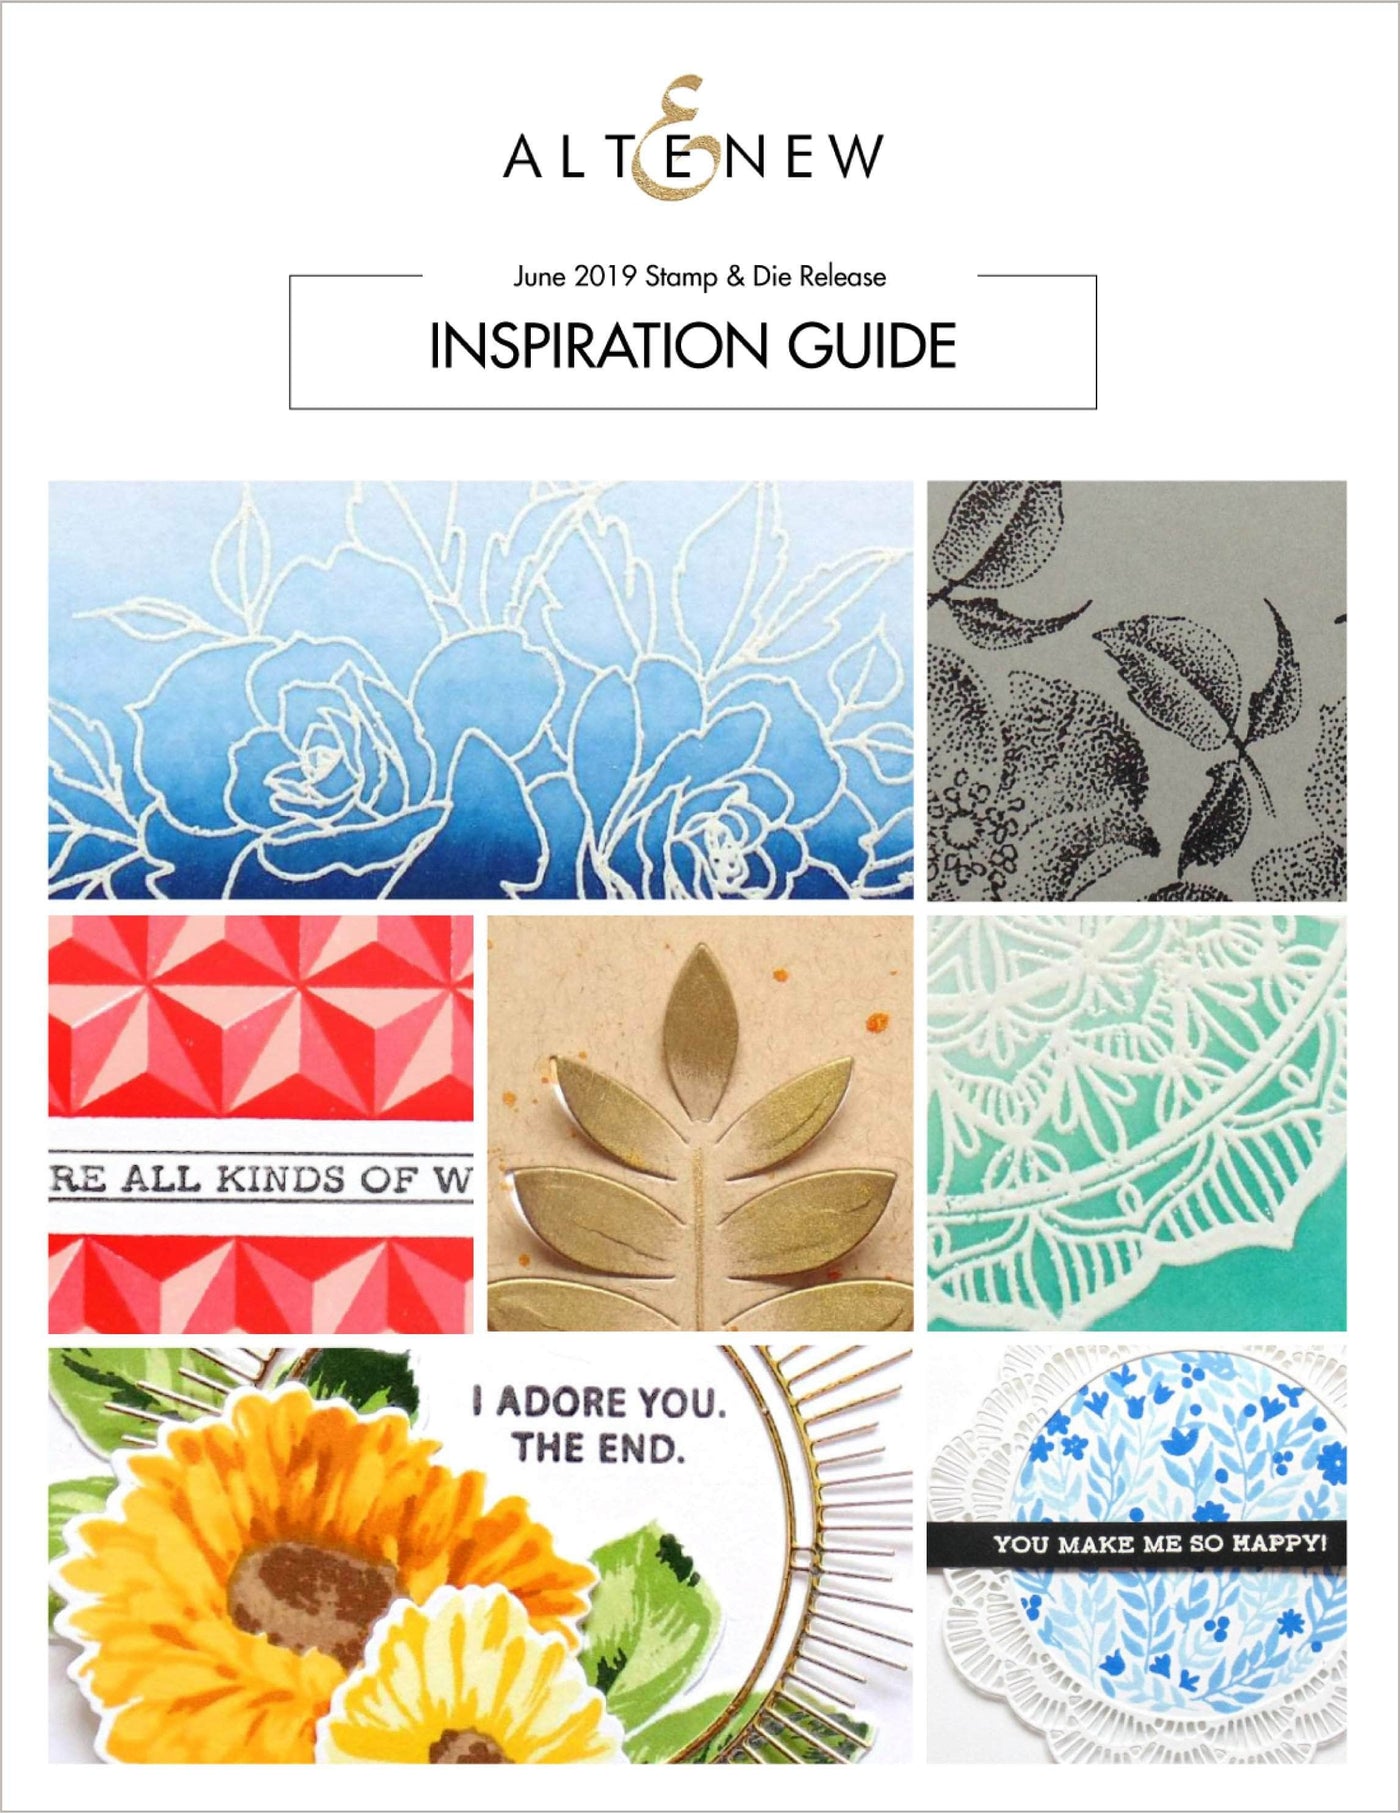 Printed Media A Welcome Reverie Stamp & Die Release Inspiration Guide